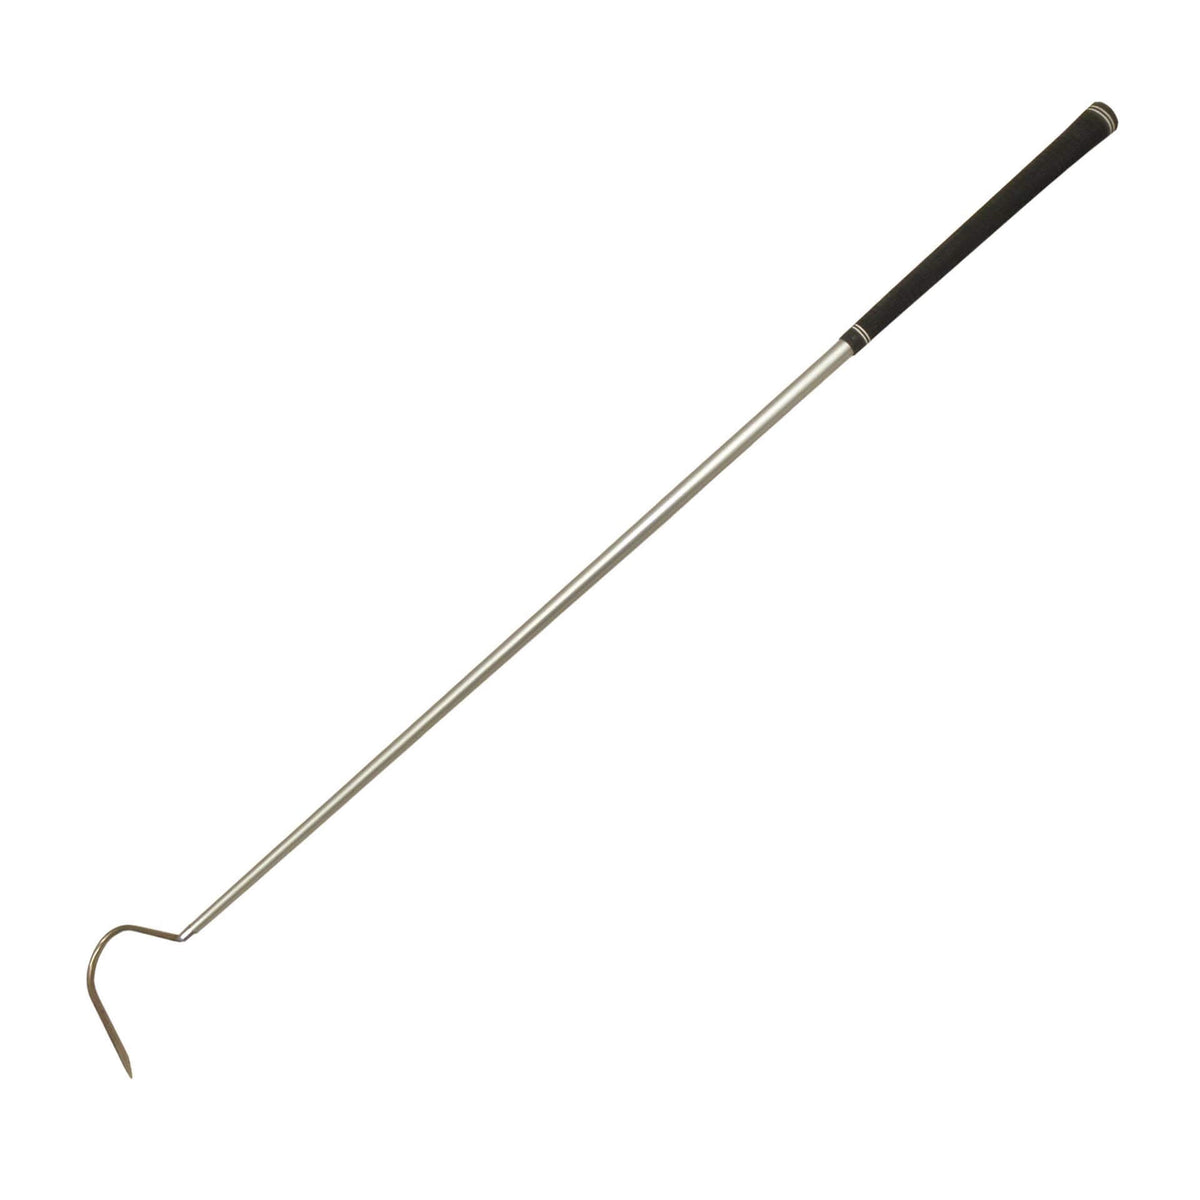 URS Golf Club Snake Hook 1090mm - In store only